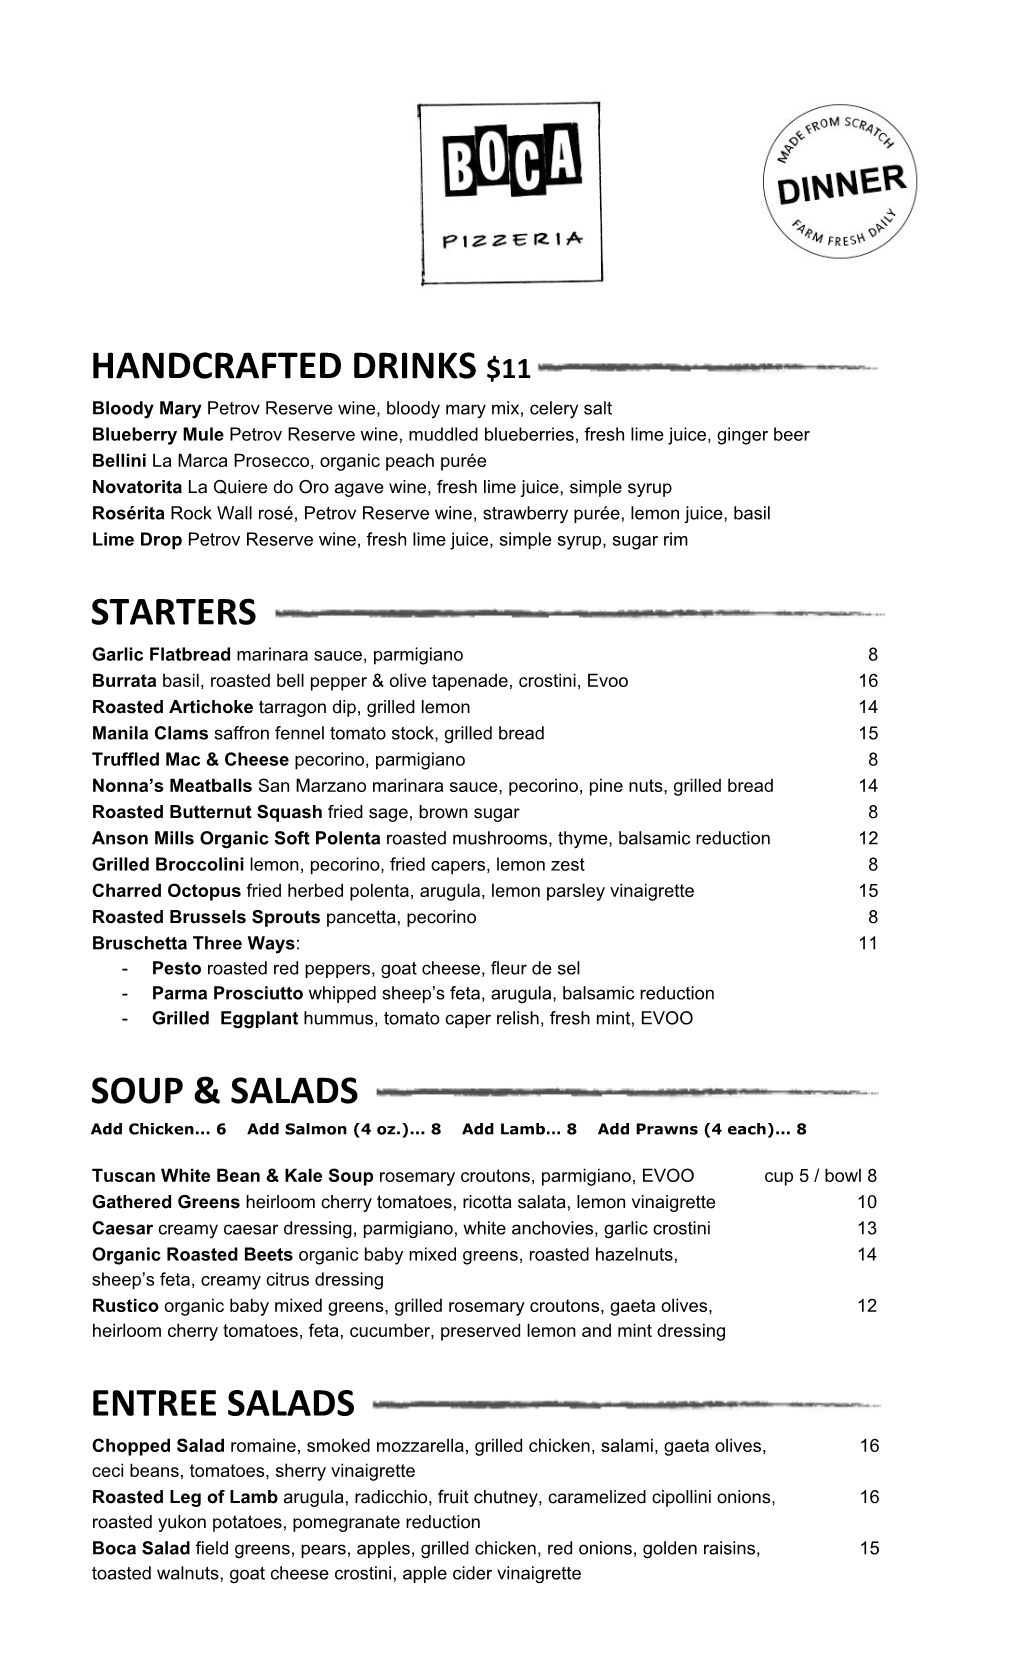 Handcrafted Drinks ​$11 Starters​ Soup & Salads